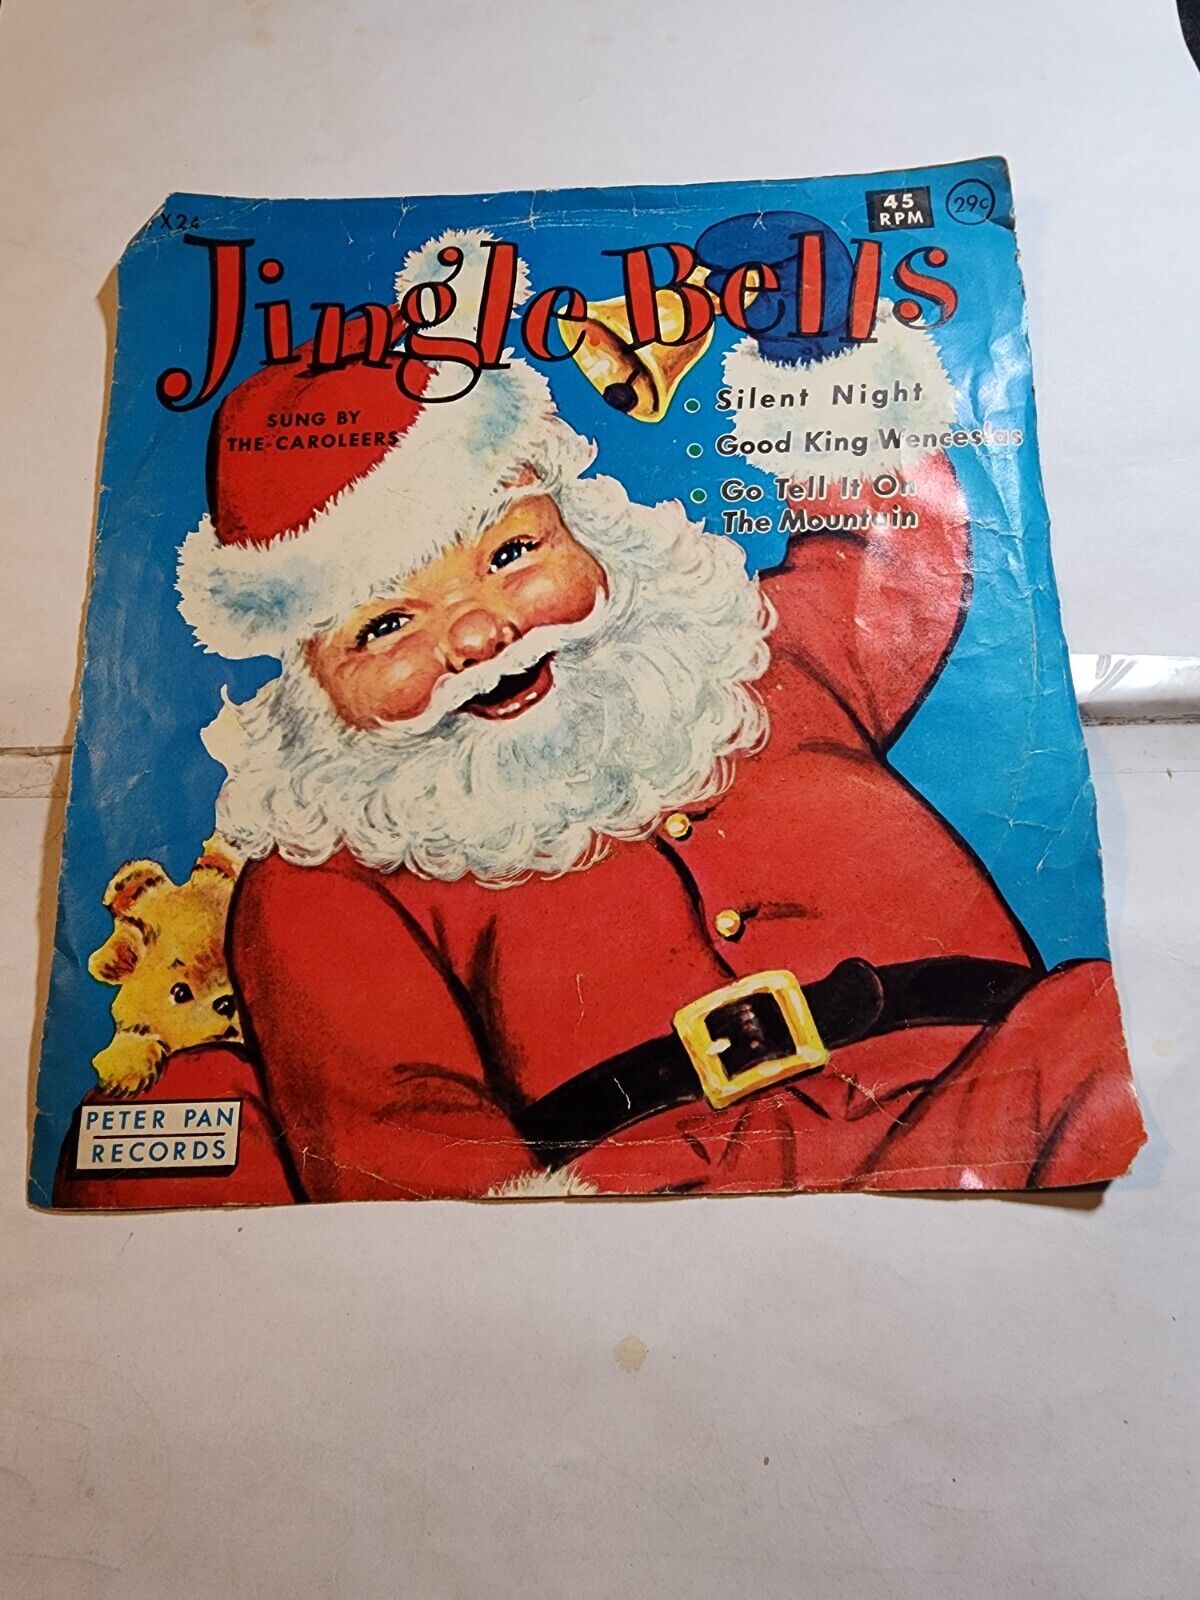 Jingle Bells by the Caroleers 45 rpm PETER PAN Records 1965 GOOD+ F277